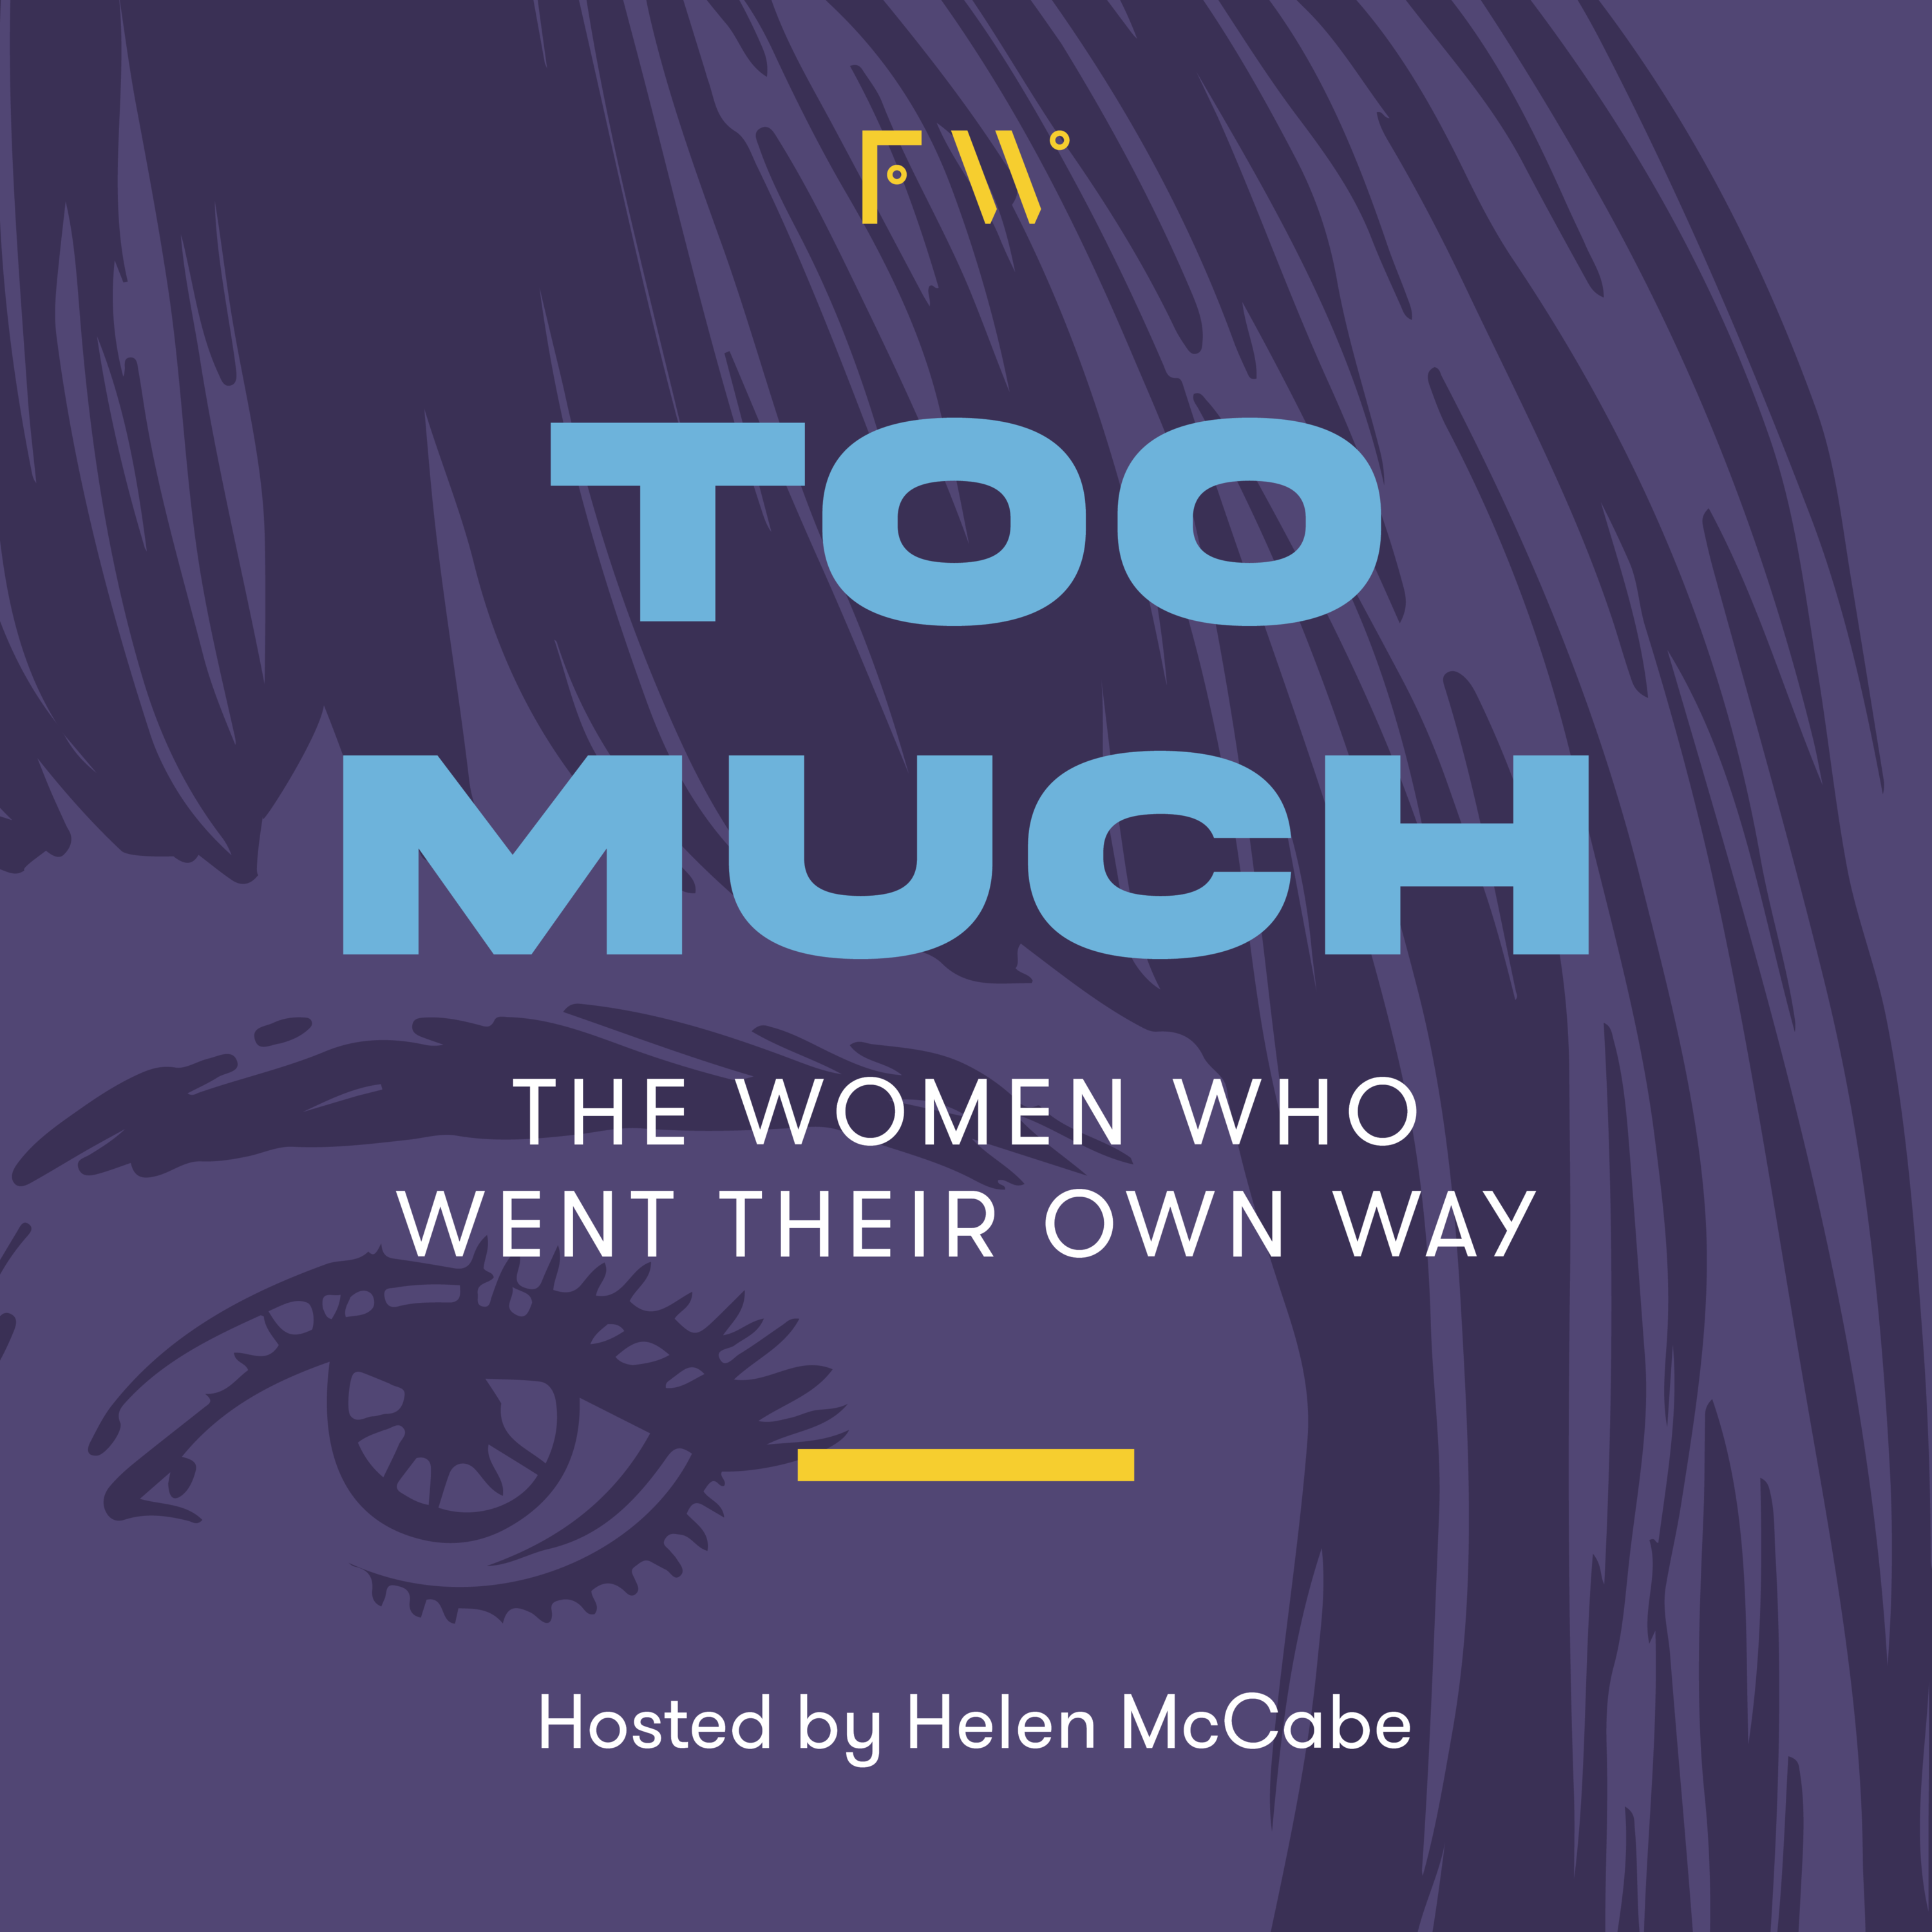 A new podcast for women who are told they’re “too much”.